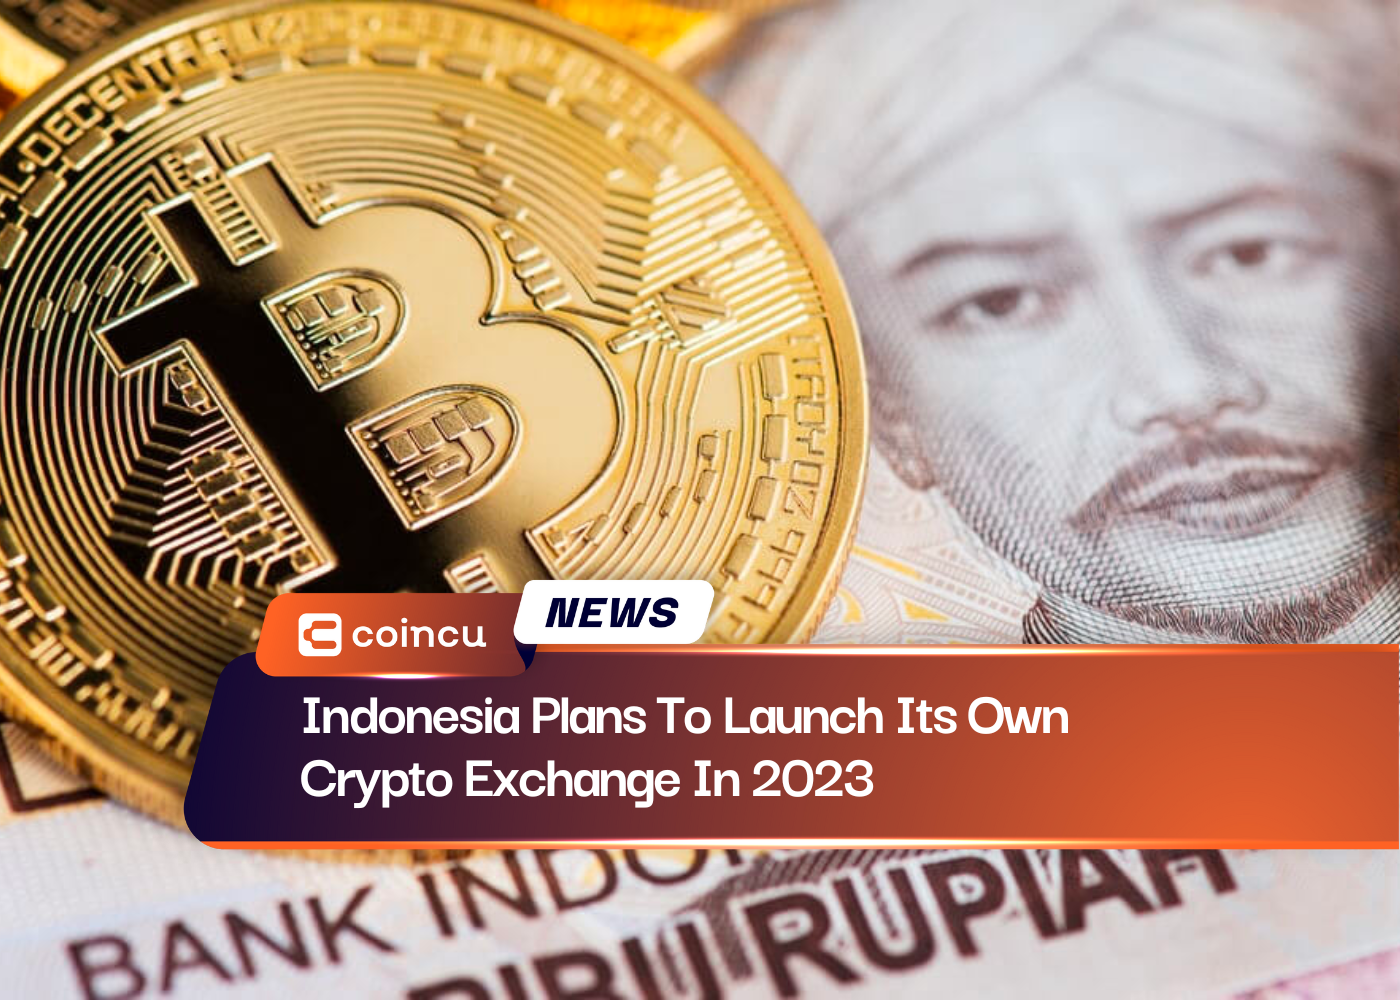 Indonesia Plans To Launch Its Own Crypto Exchange In 2023